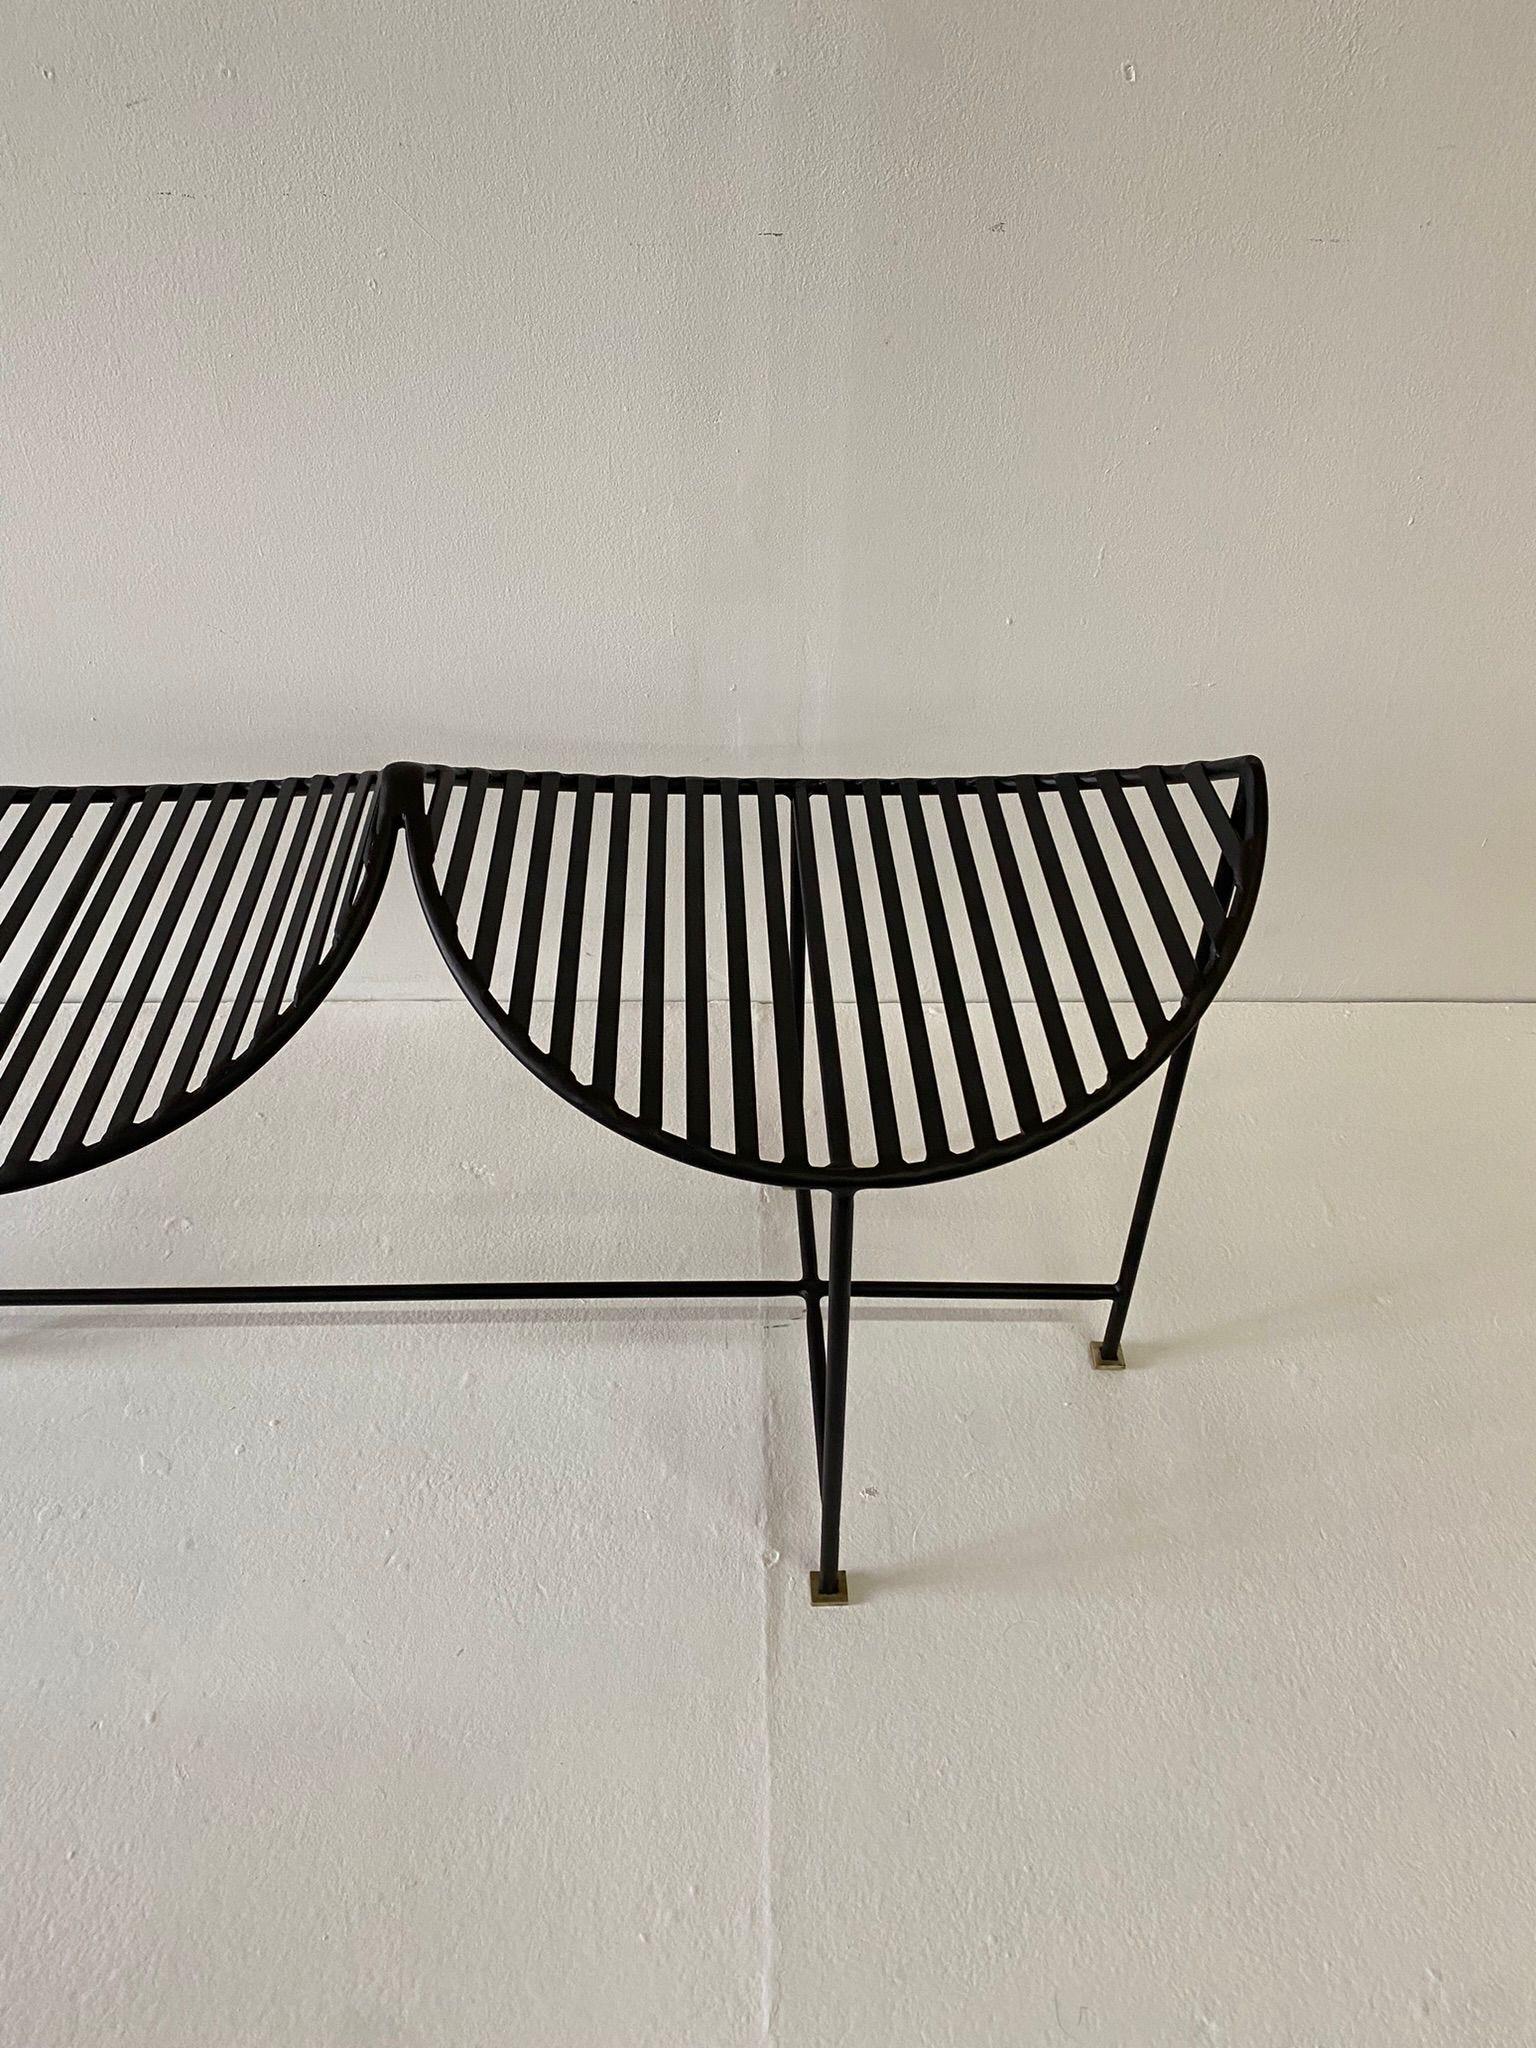 American Iron Four-Seat Powder-coated Bench For Sale